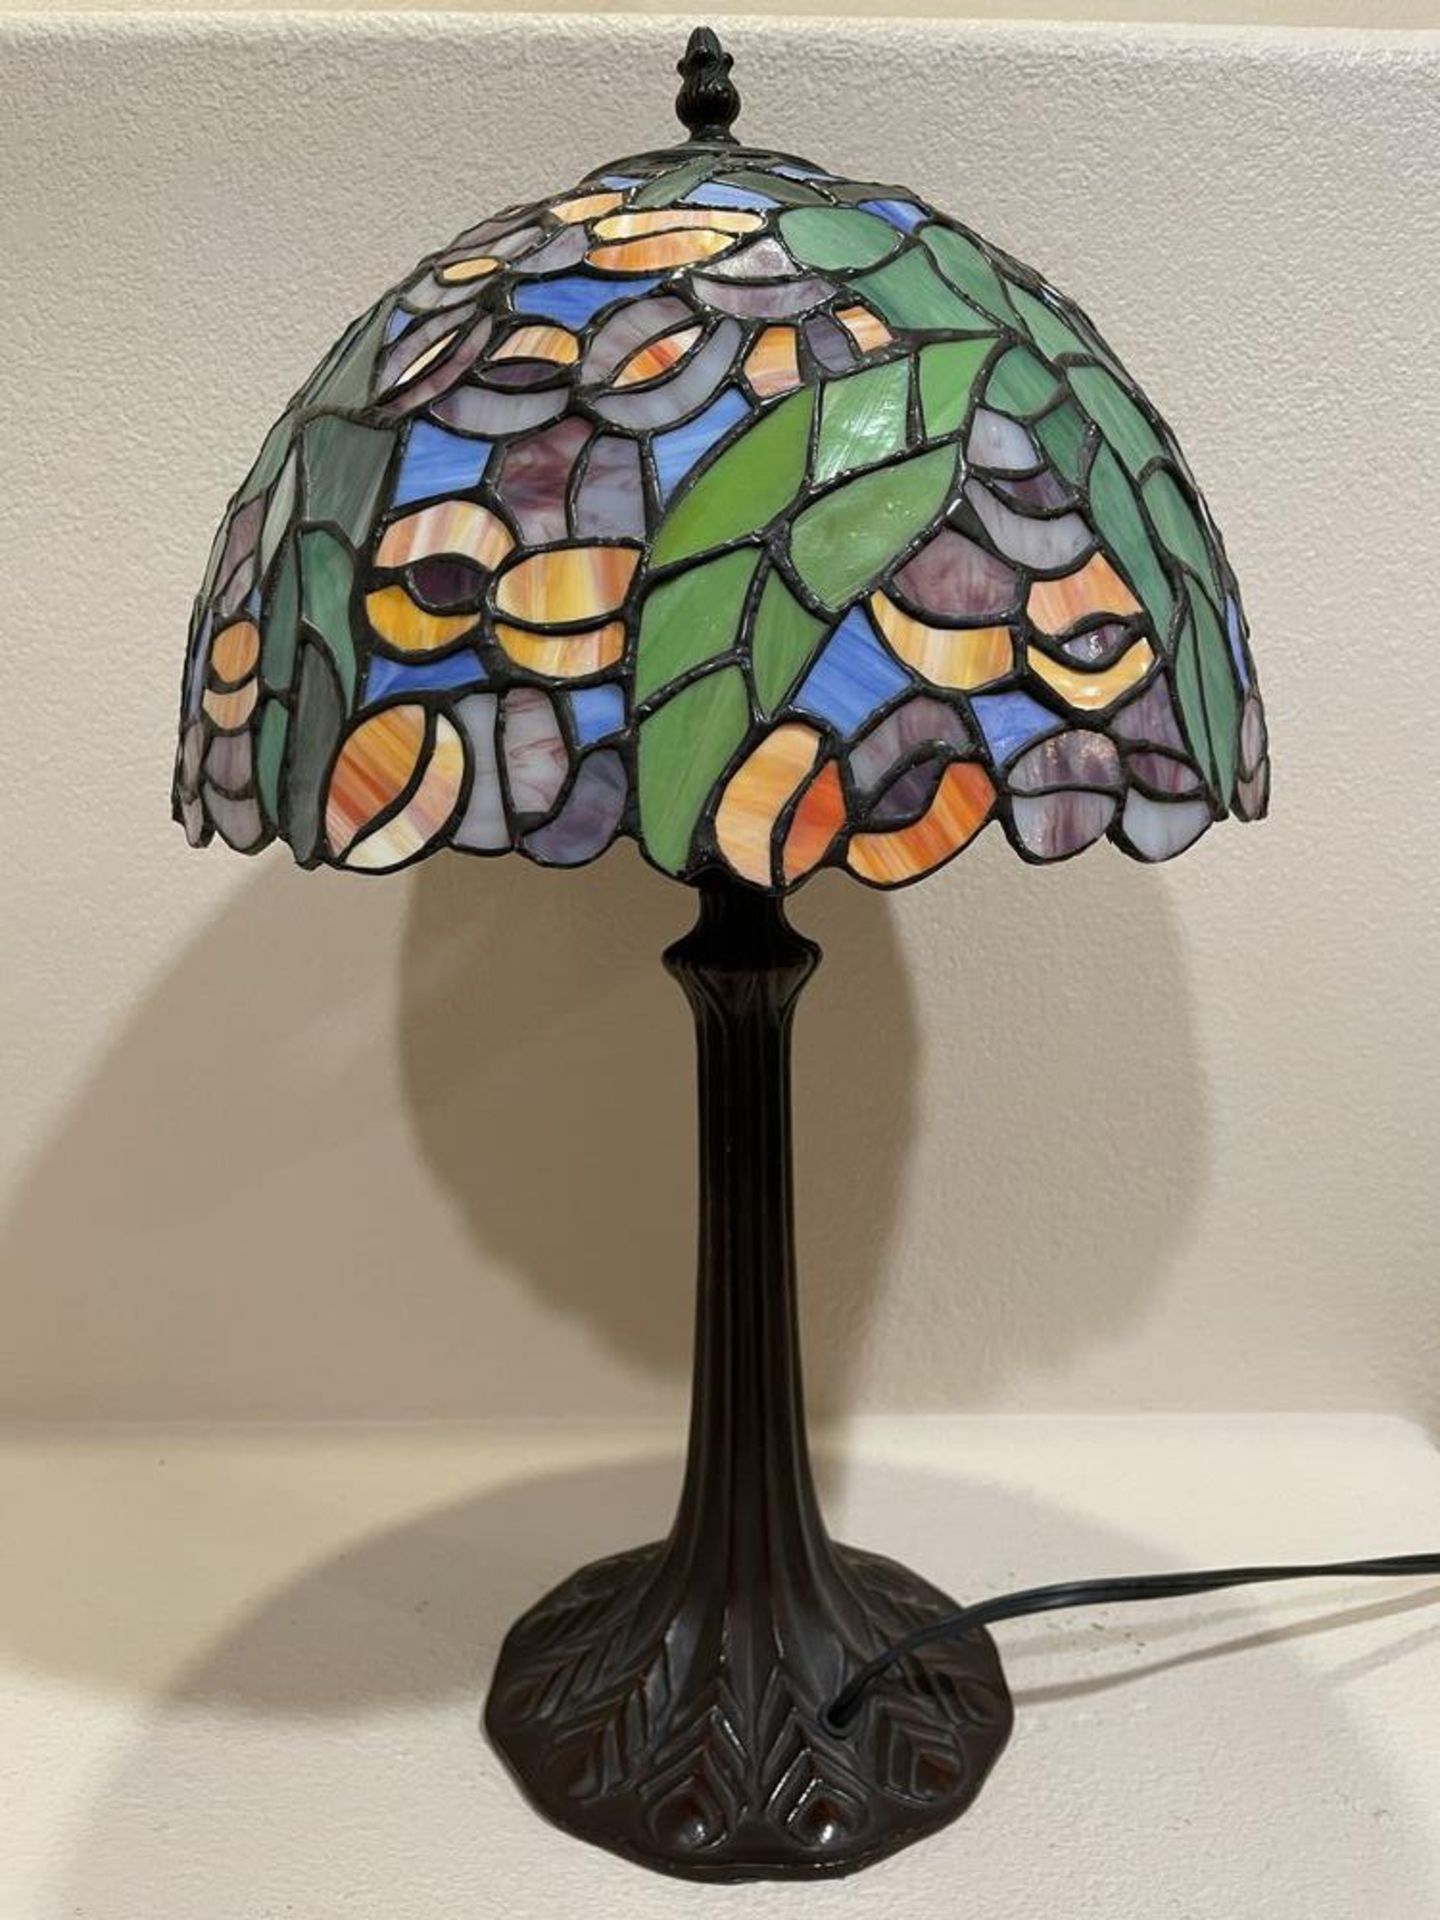 Shorter Tiffany Style Lamp - 21 x 14" - May need to be repaired, not turning on - Image 4 of 4